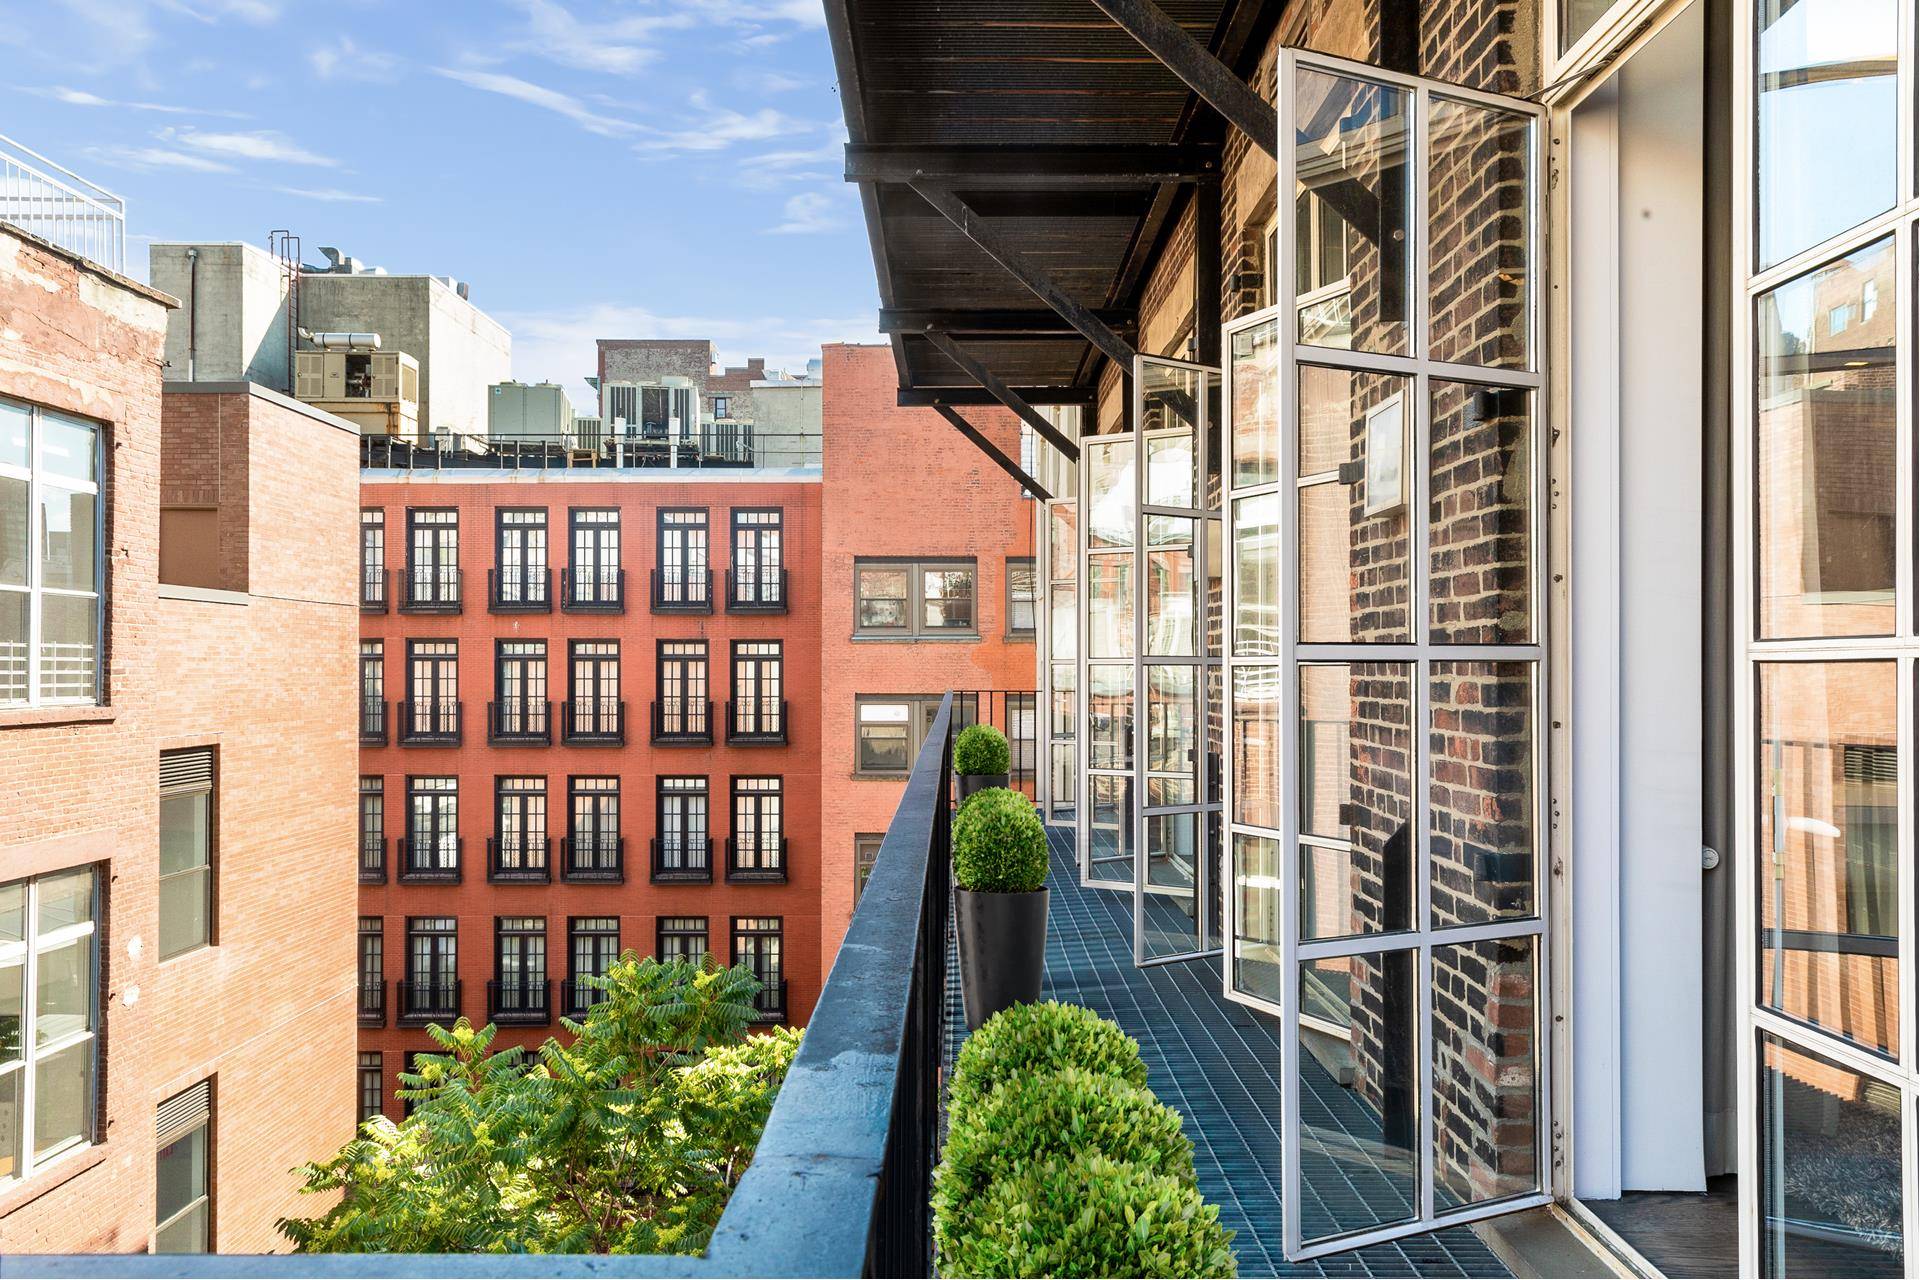 132 GREENE ST RESIDENCE 5 Available ImmediatelyLocated in the heart of Soho's Historic Cast Iron District, this architecturally stunning full floor loft spanning approximately 2, 700 sqft offers the perfect ...